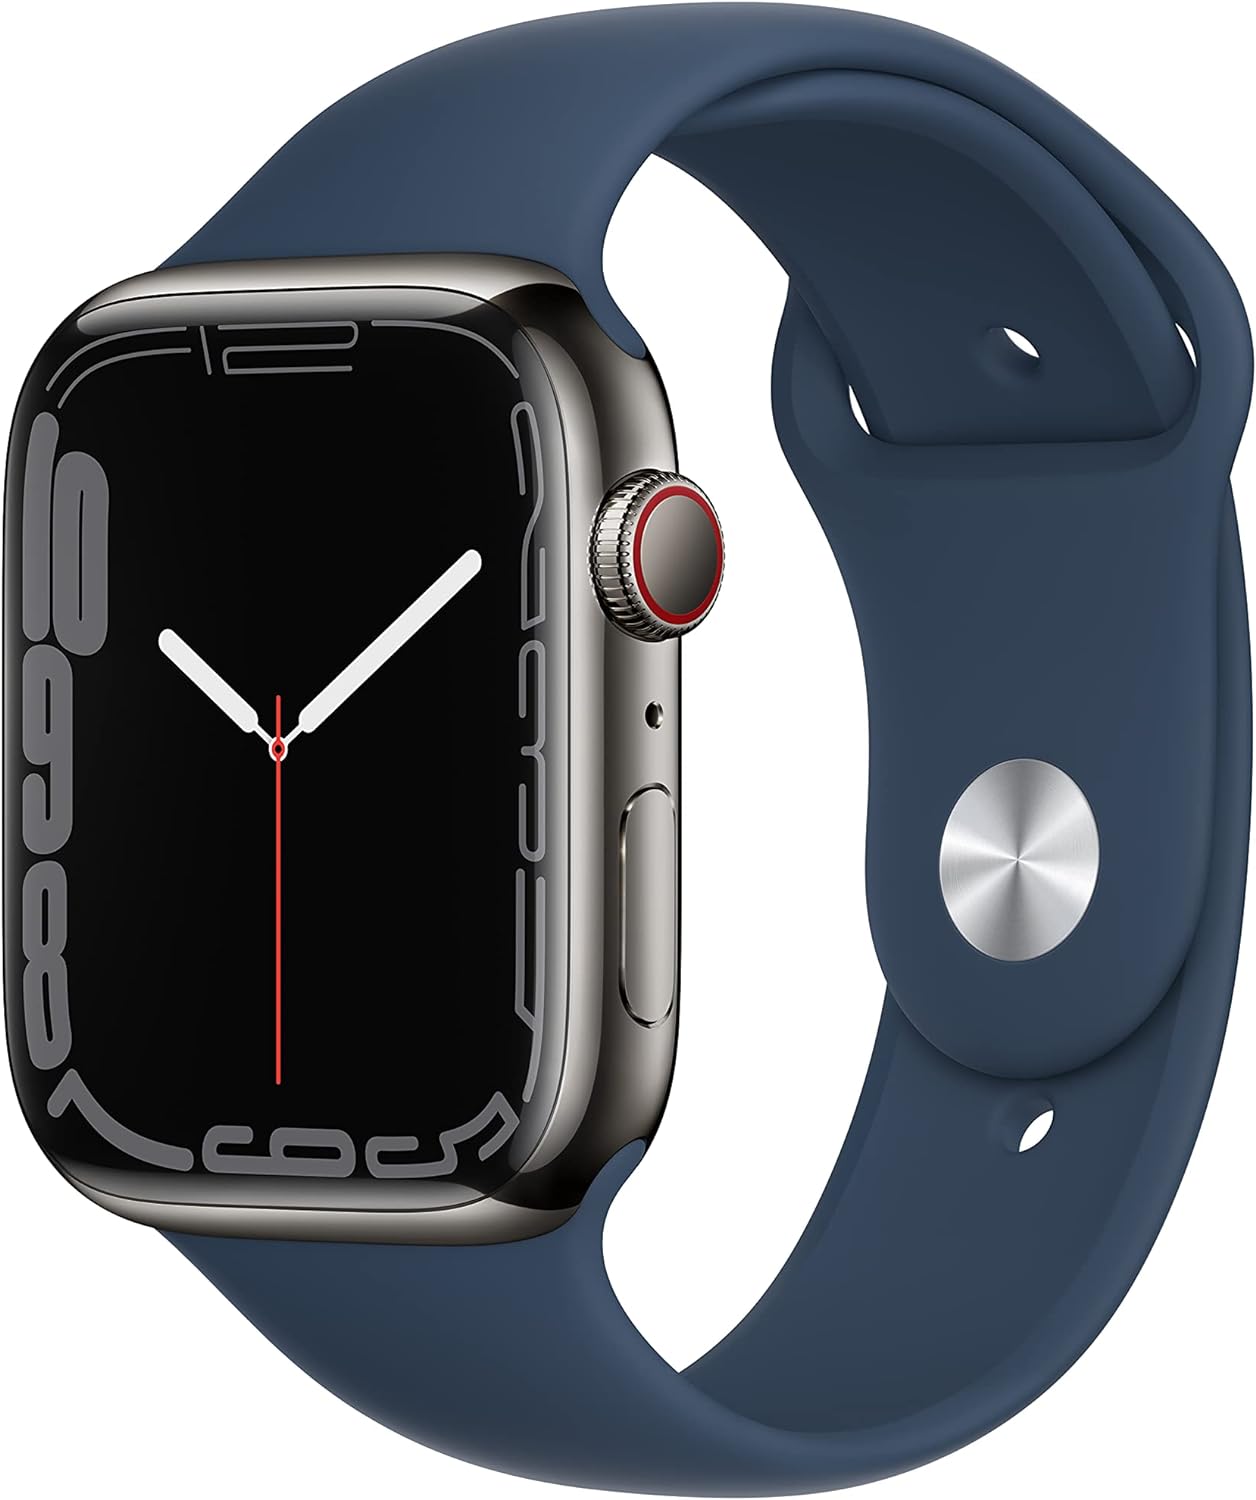 Apple Watch Series 7 GPS + Cellular 45mm Graphite Stainless Steel Case Smart Watch w/ Abyss Blue Sport Band $302 + Free Shipping